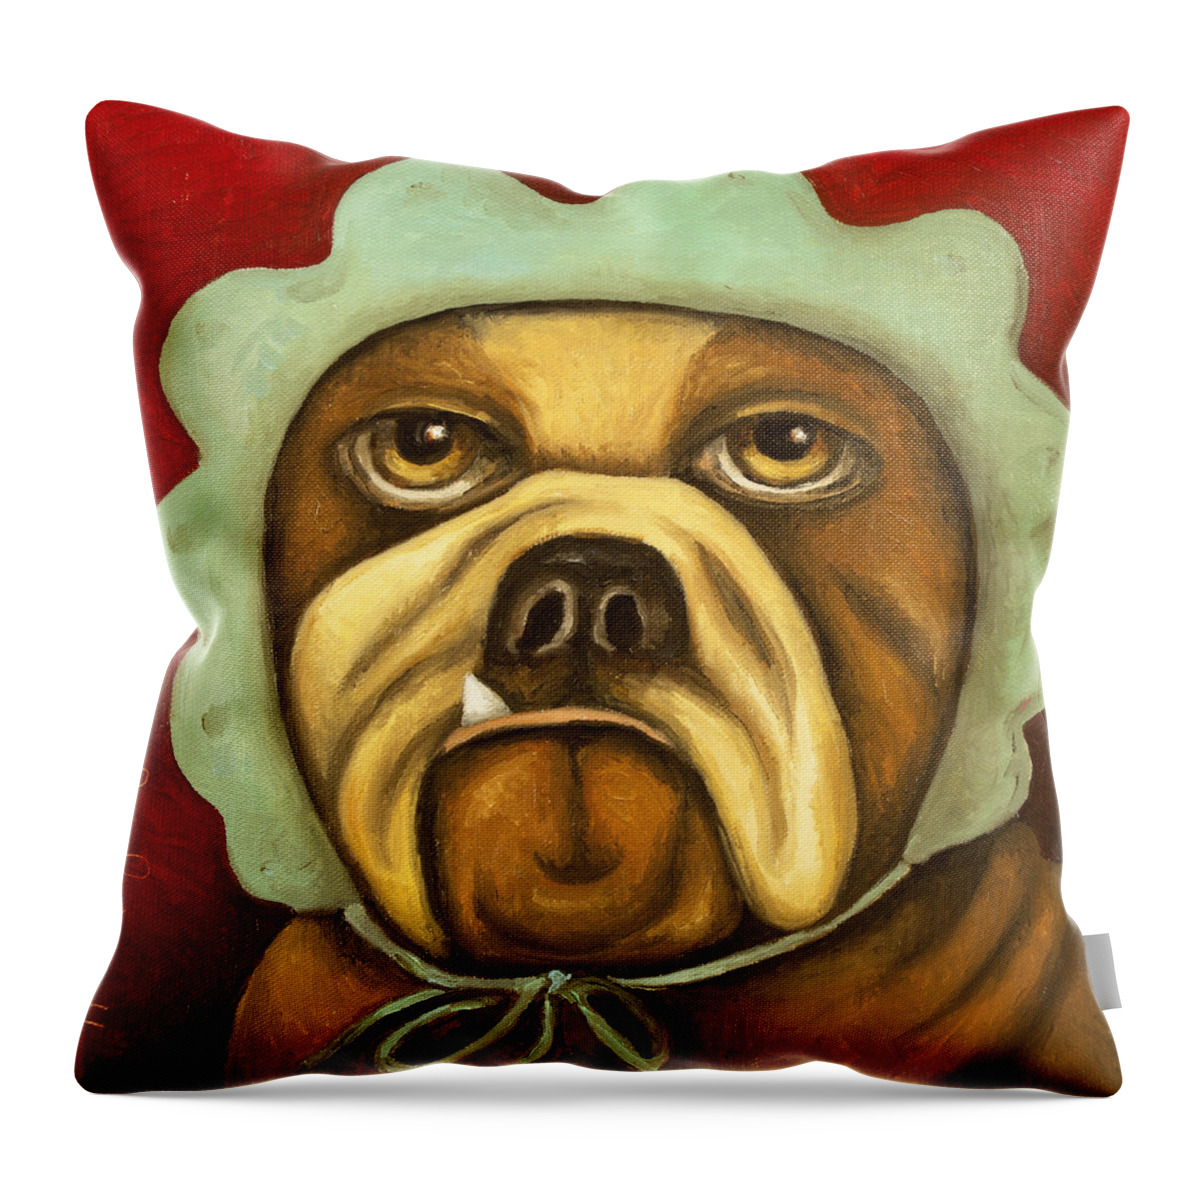 Dog Throw Pillow featuring the painting Baby Crash by Leah Saulnier The Painting Maniac